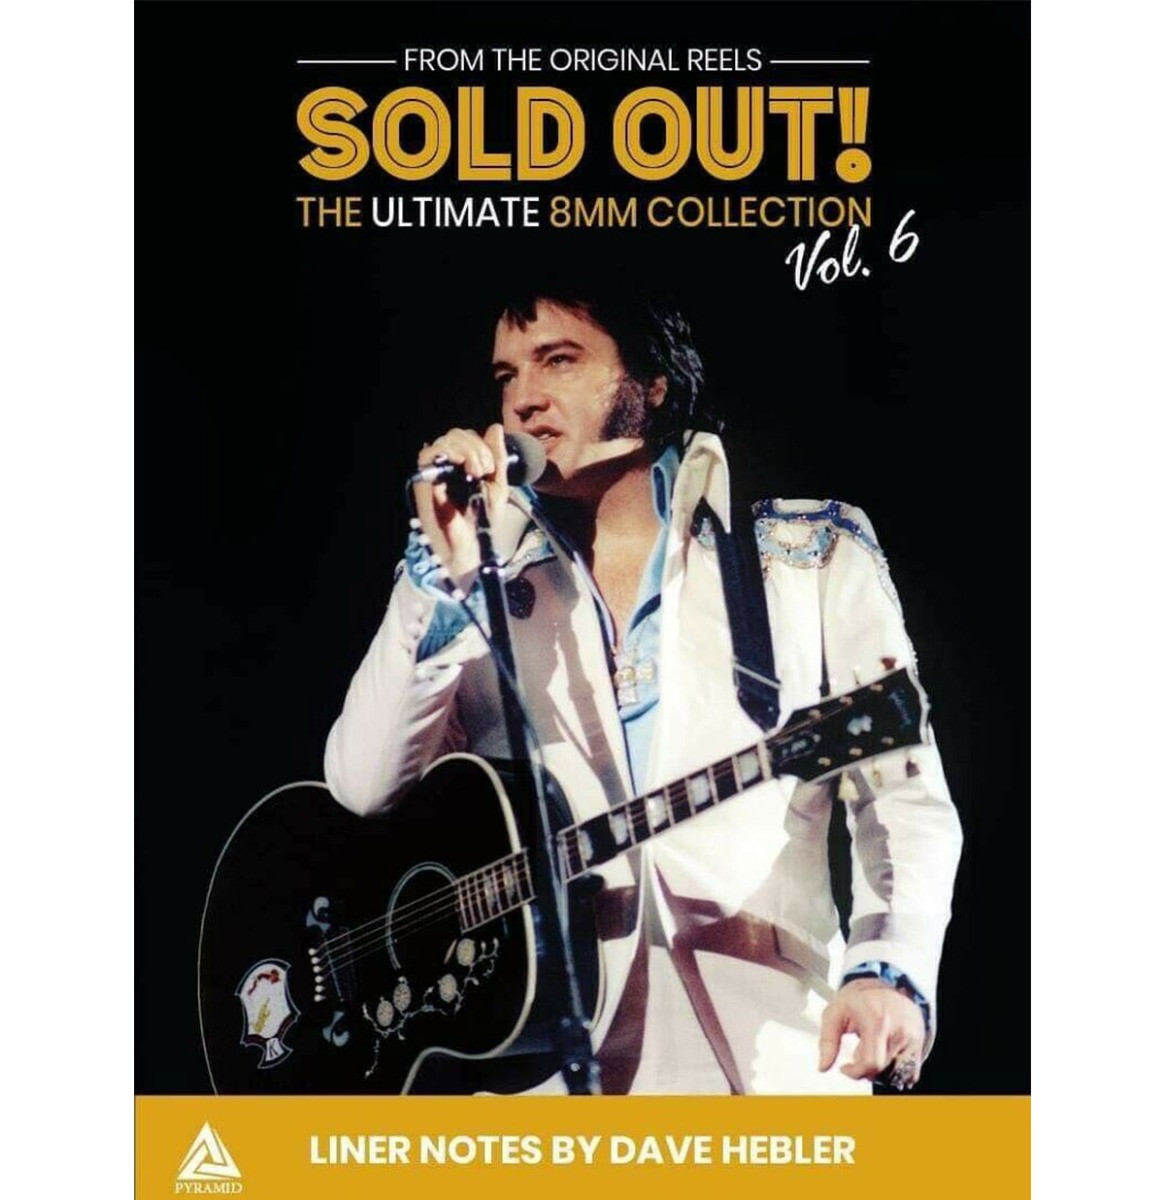 Elvis Presley: Sold Out! The Ultimate 8MM Collection Vol. 6 - 2 DVD Set